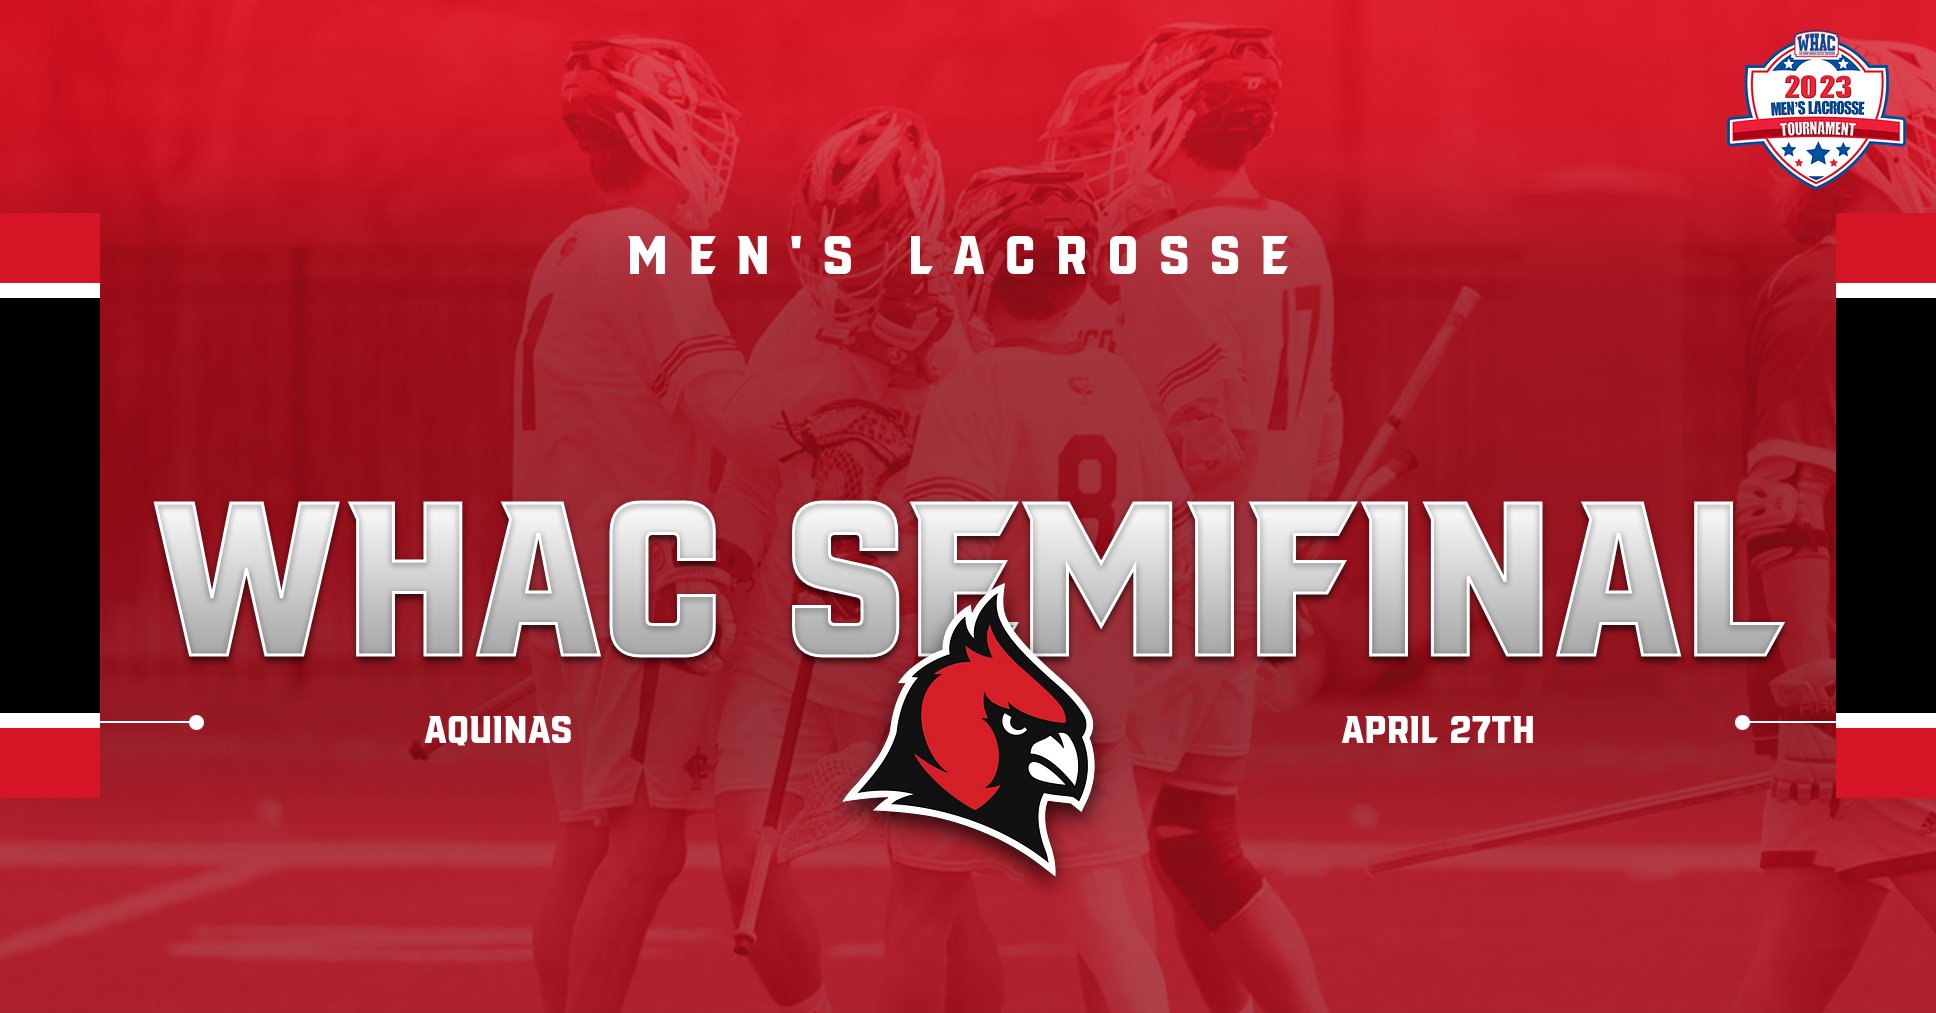 WHAC PREVIEW: Men's Lacrosse faces off with Aquinas in Semifinals